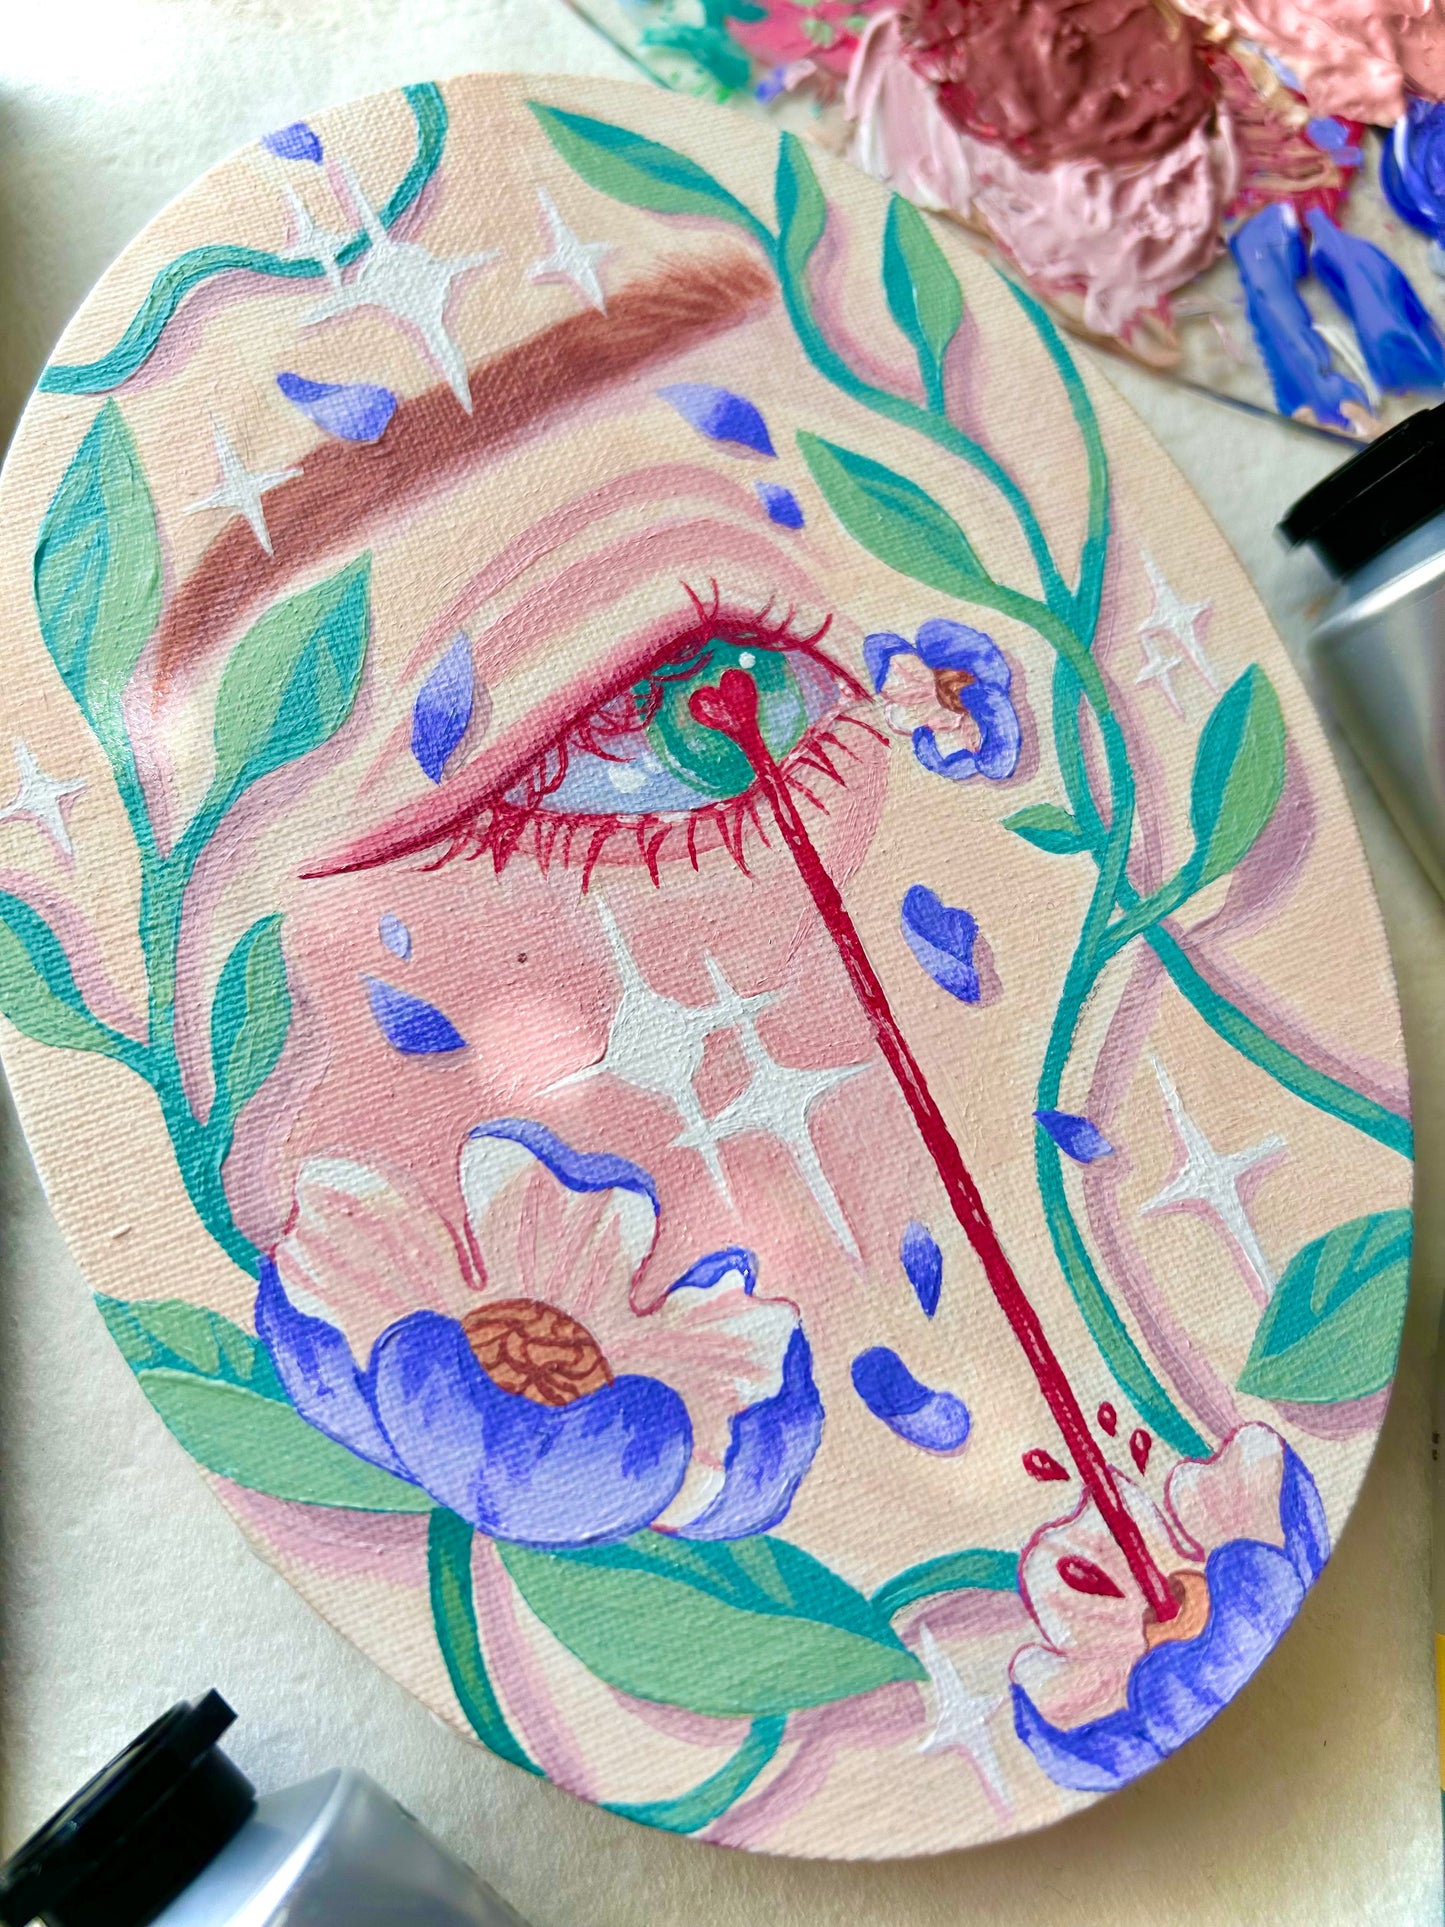 "Fragile" Oval Acrylic Painting on Canvas - 5x7in